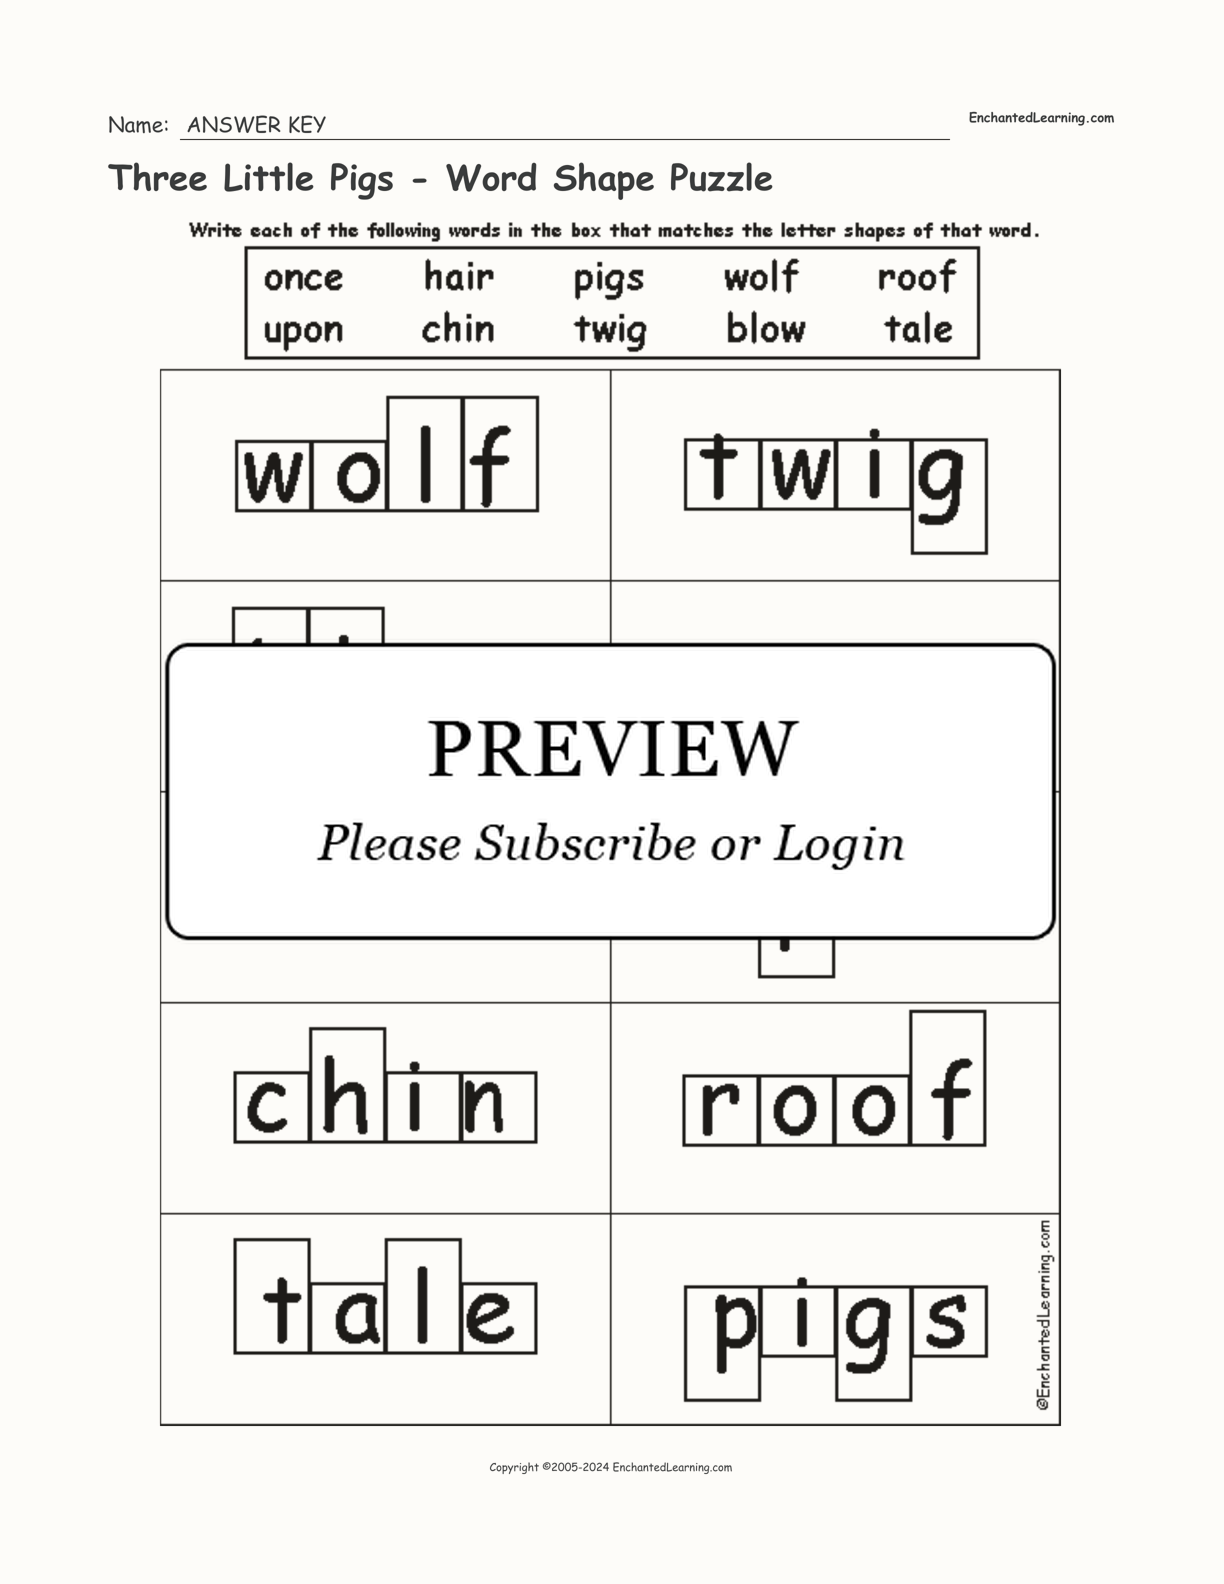 Three Little Pigs - Word Shape Puzzle interactive worksheet page 2